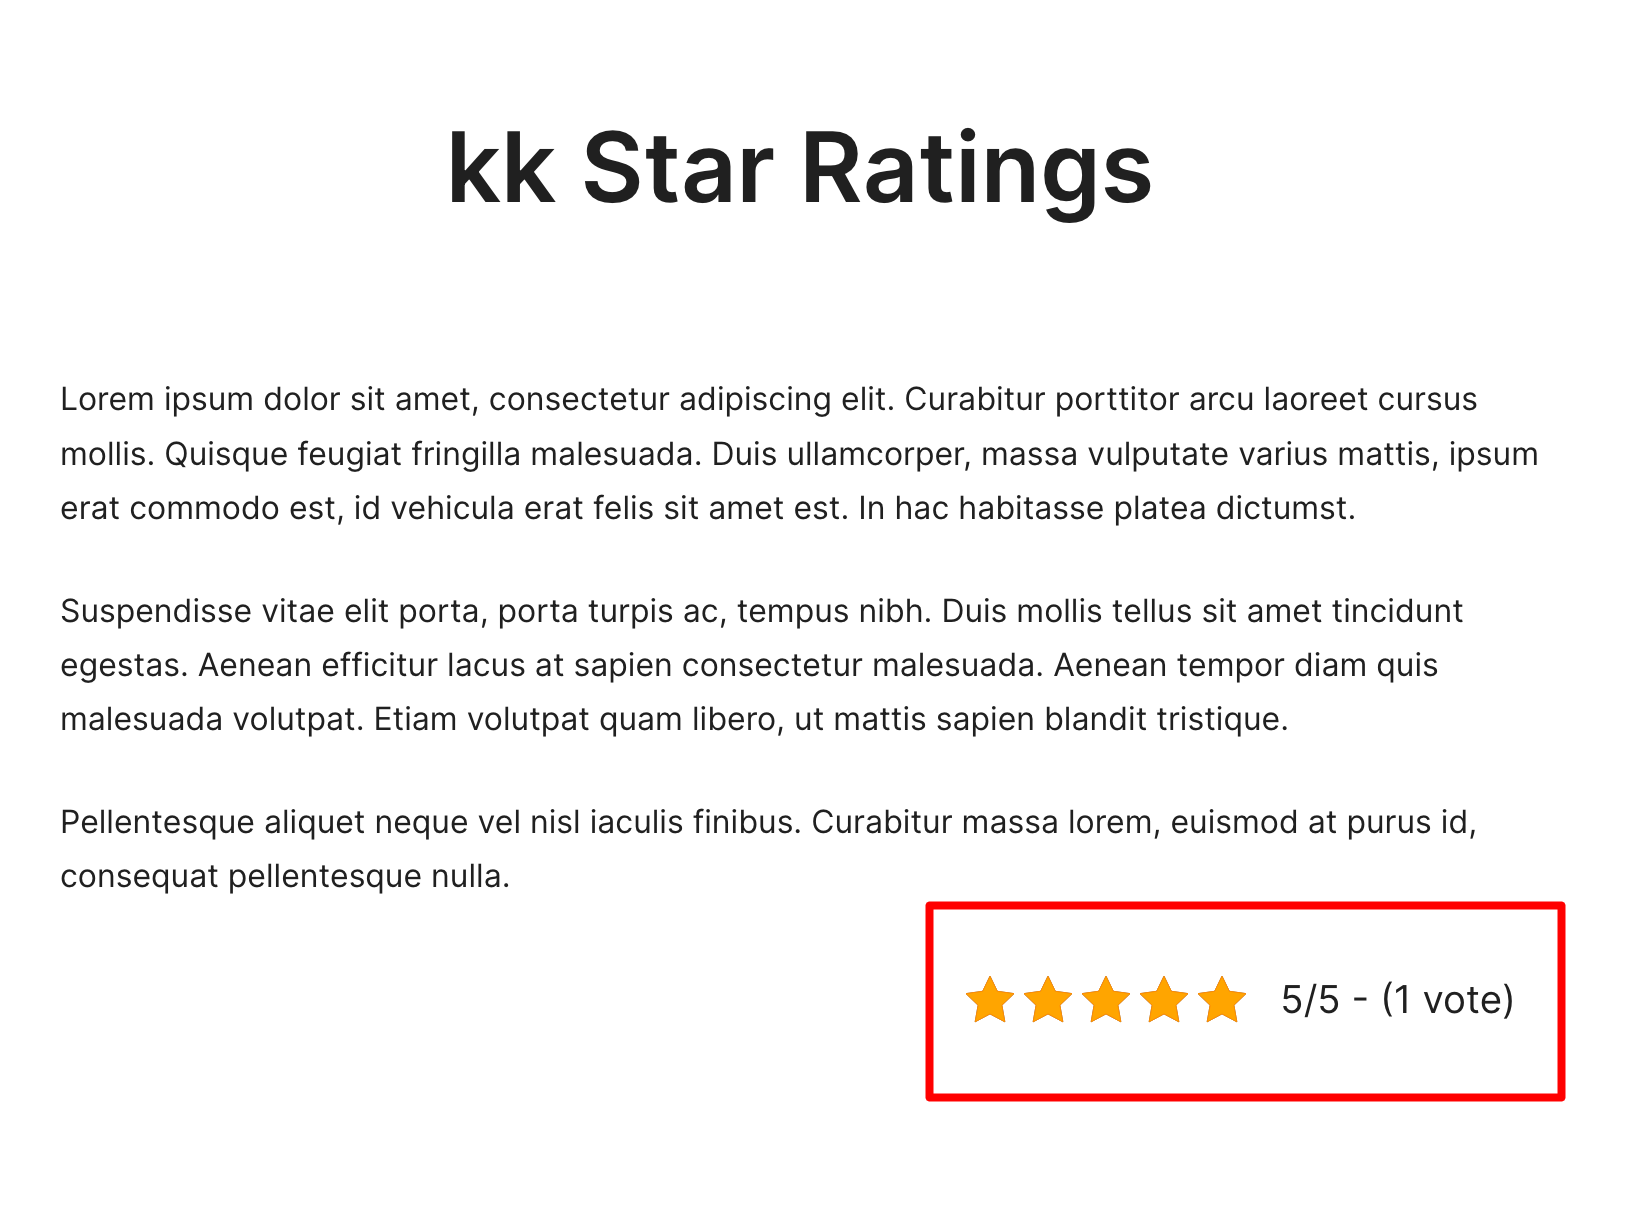 A rich snippet generated with kk Star Ratings.